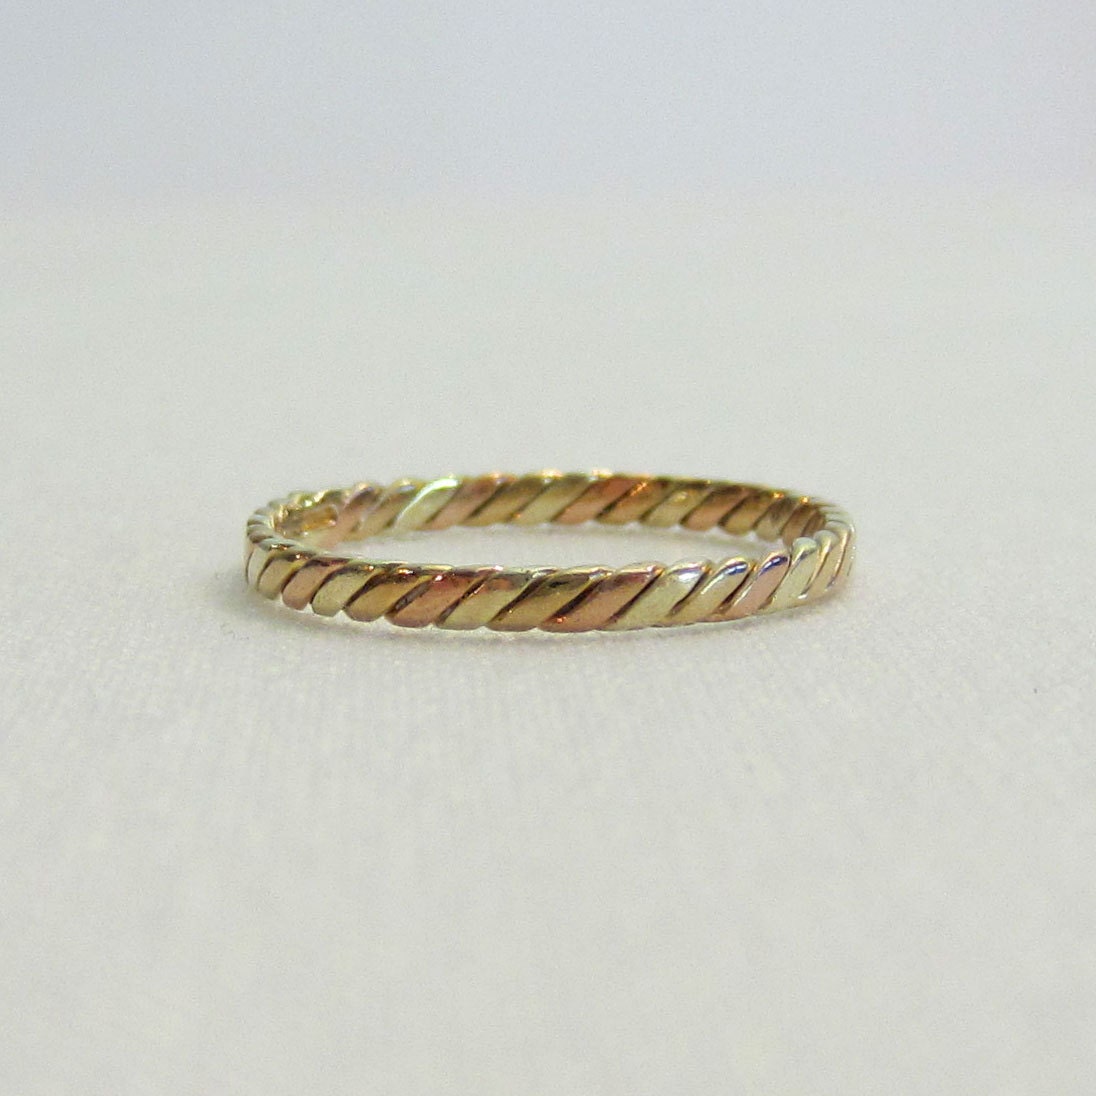 Elegant Gold Twist Wedding Band in Rose, White, and Yellow Gold.